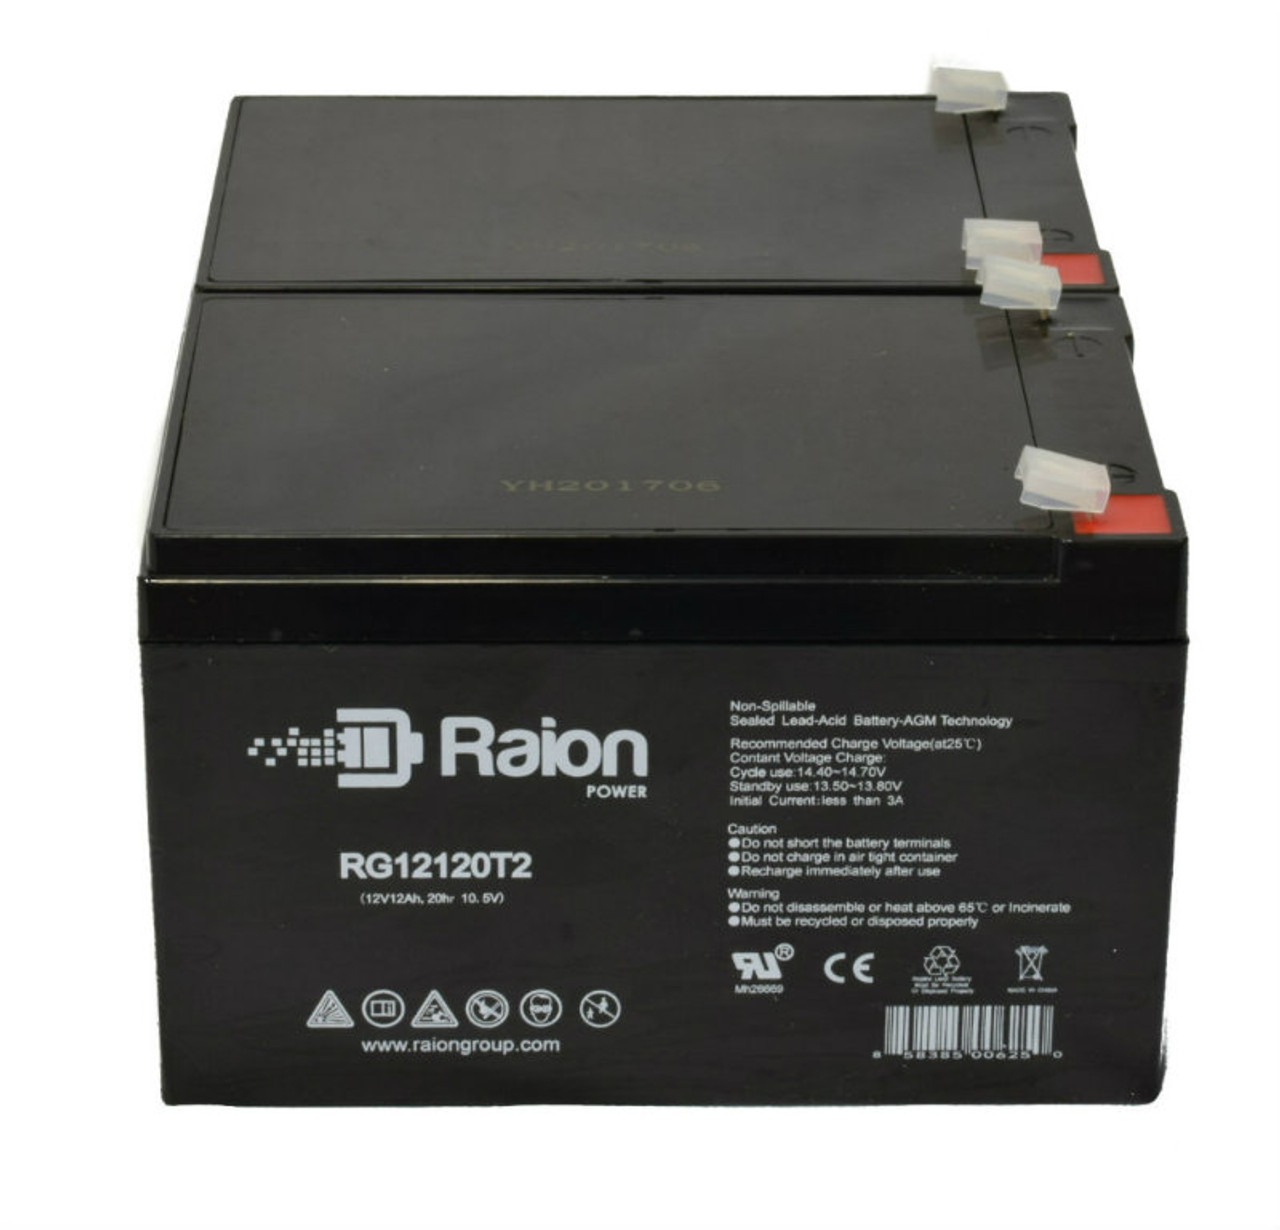 Raion Power 12V 12Ah Non-Spillable Compatible Replacement Battery for Fengri 6-FM-12 - (2 Pack)